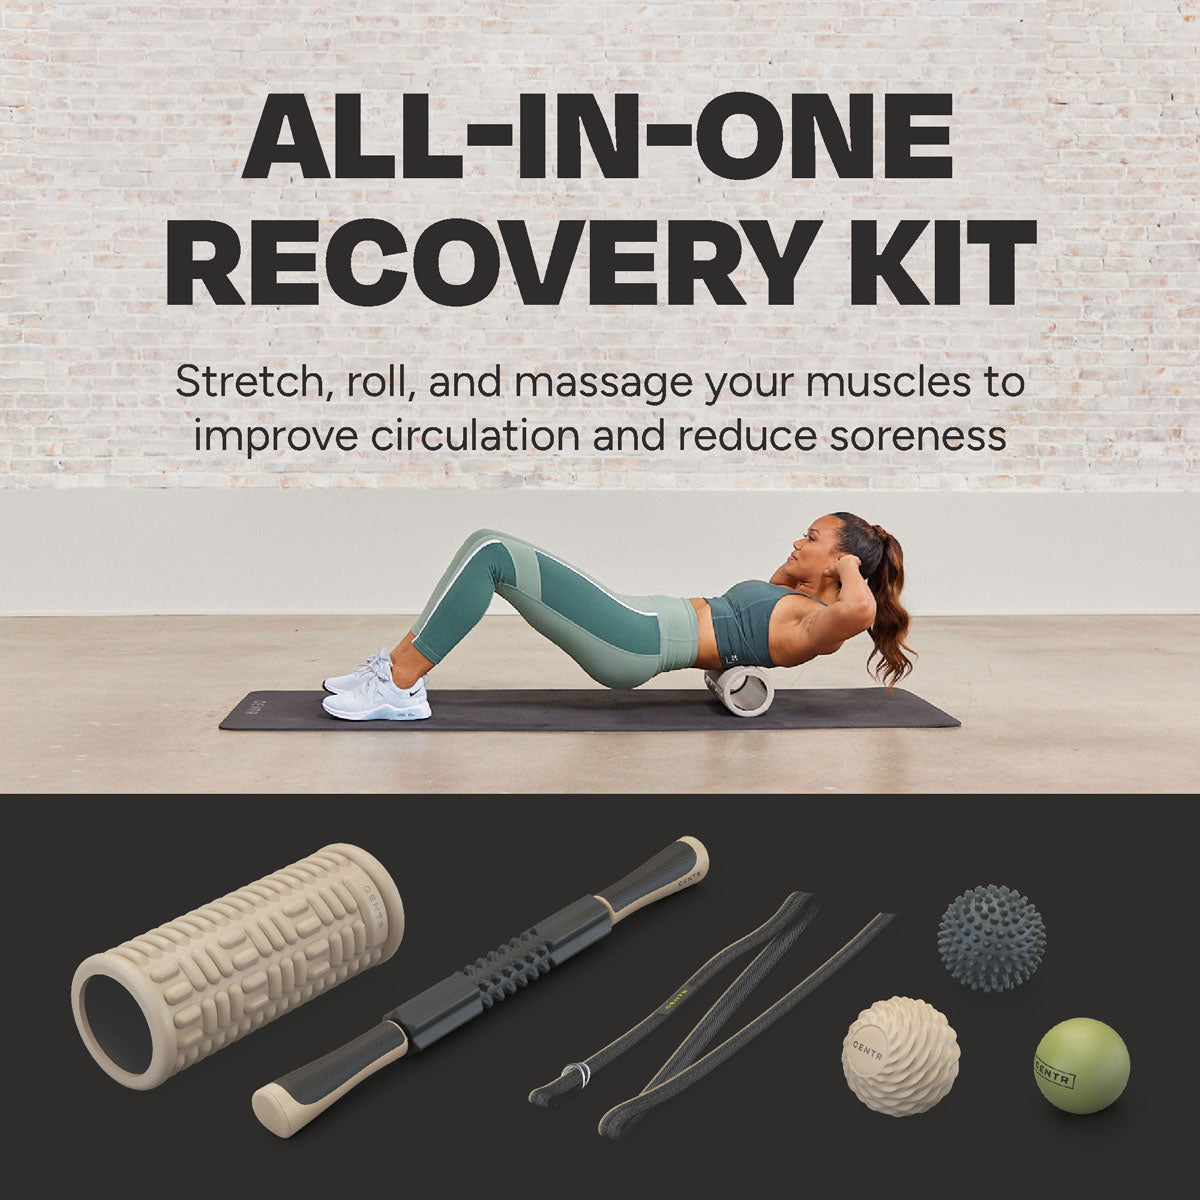 Workout Recovery Kit - Target Sore Muscles - Centr